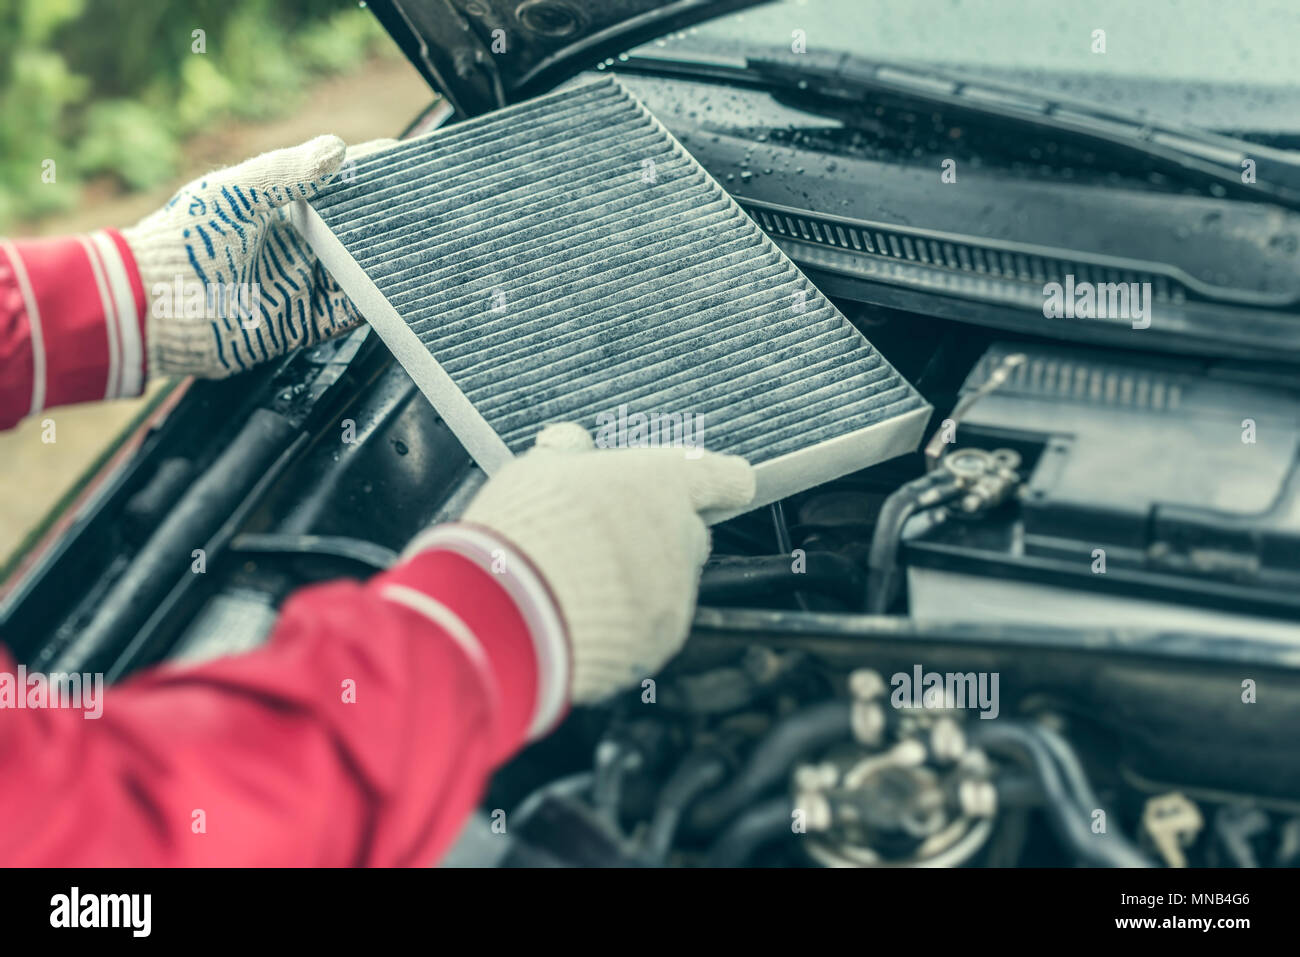 The auto mechanic replaces the car's interior filter. Stock Photo